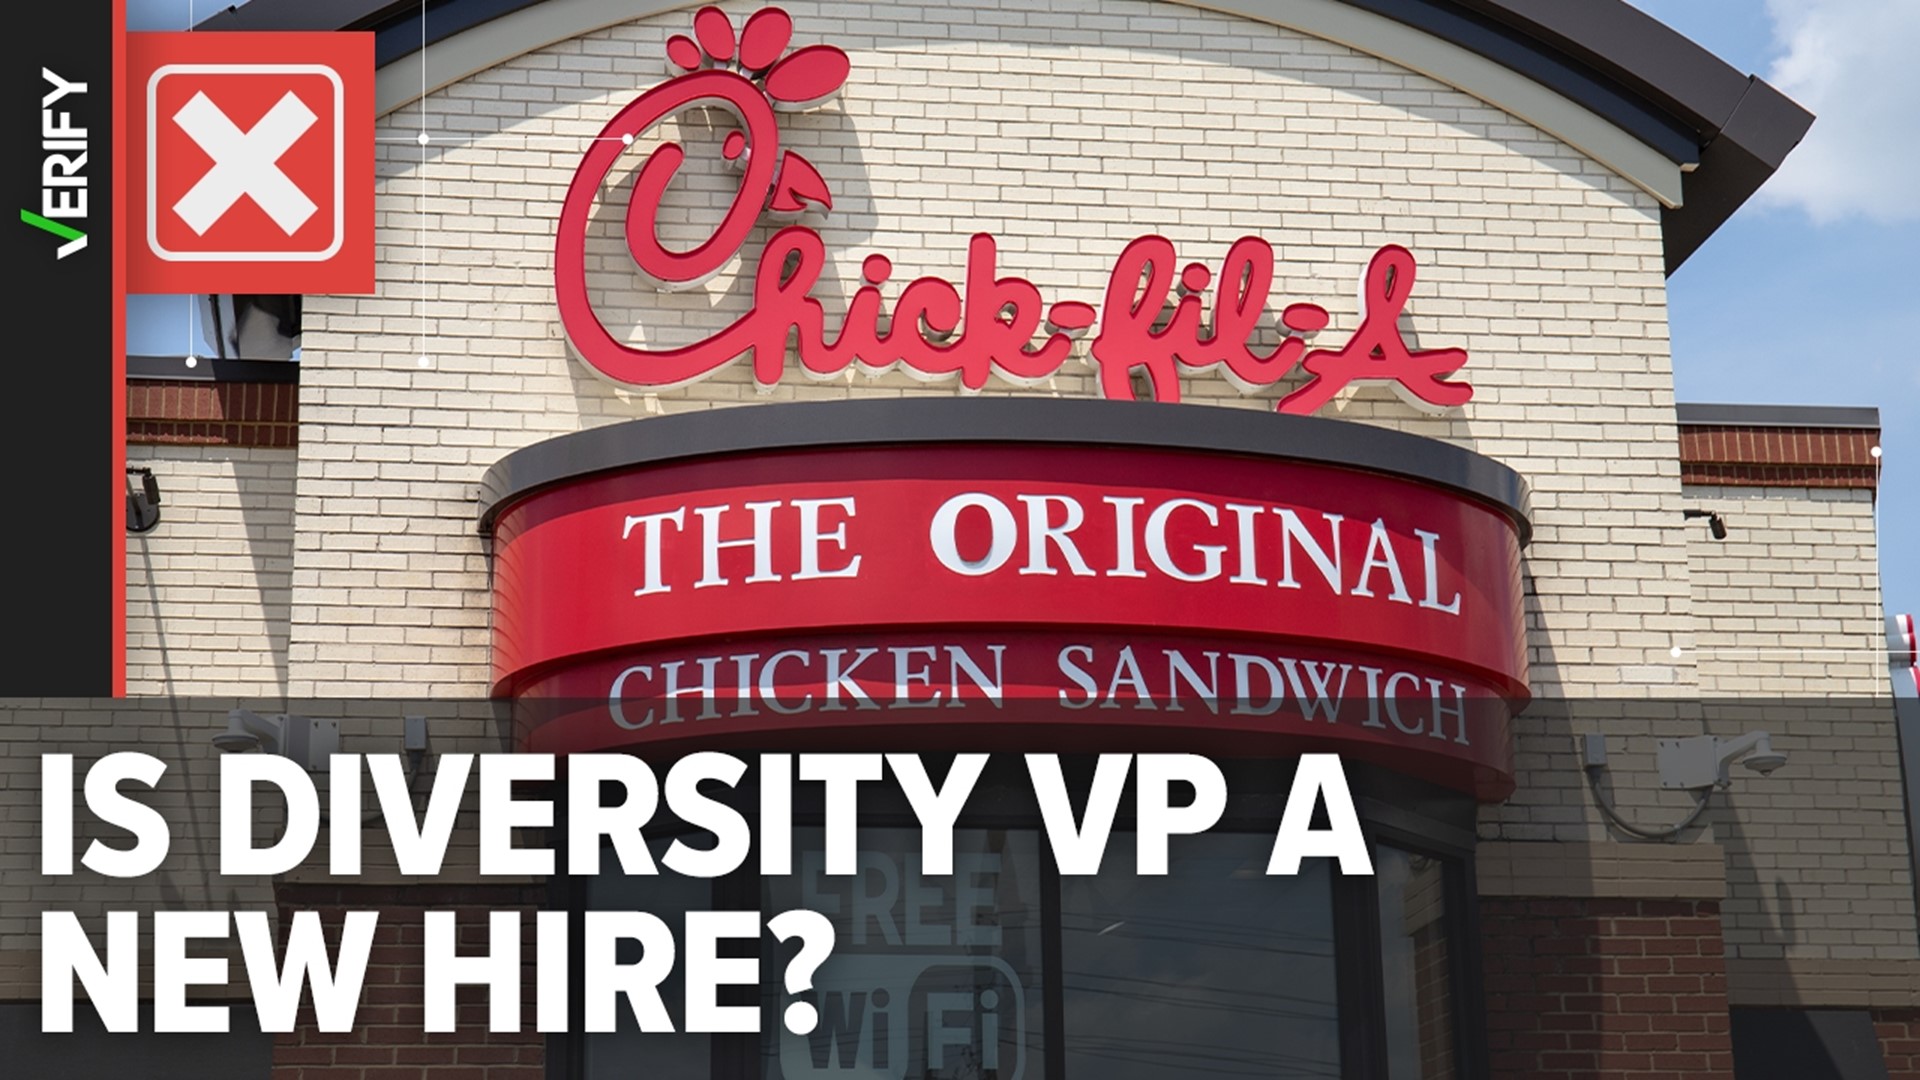 Claims that Chick-fil-A just hired Erick McReynolds as the company’s vice president of DE&I have led to calls for a boycott. But the position isn’t new.